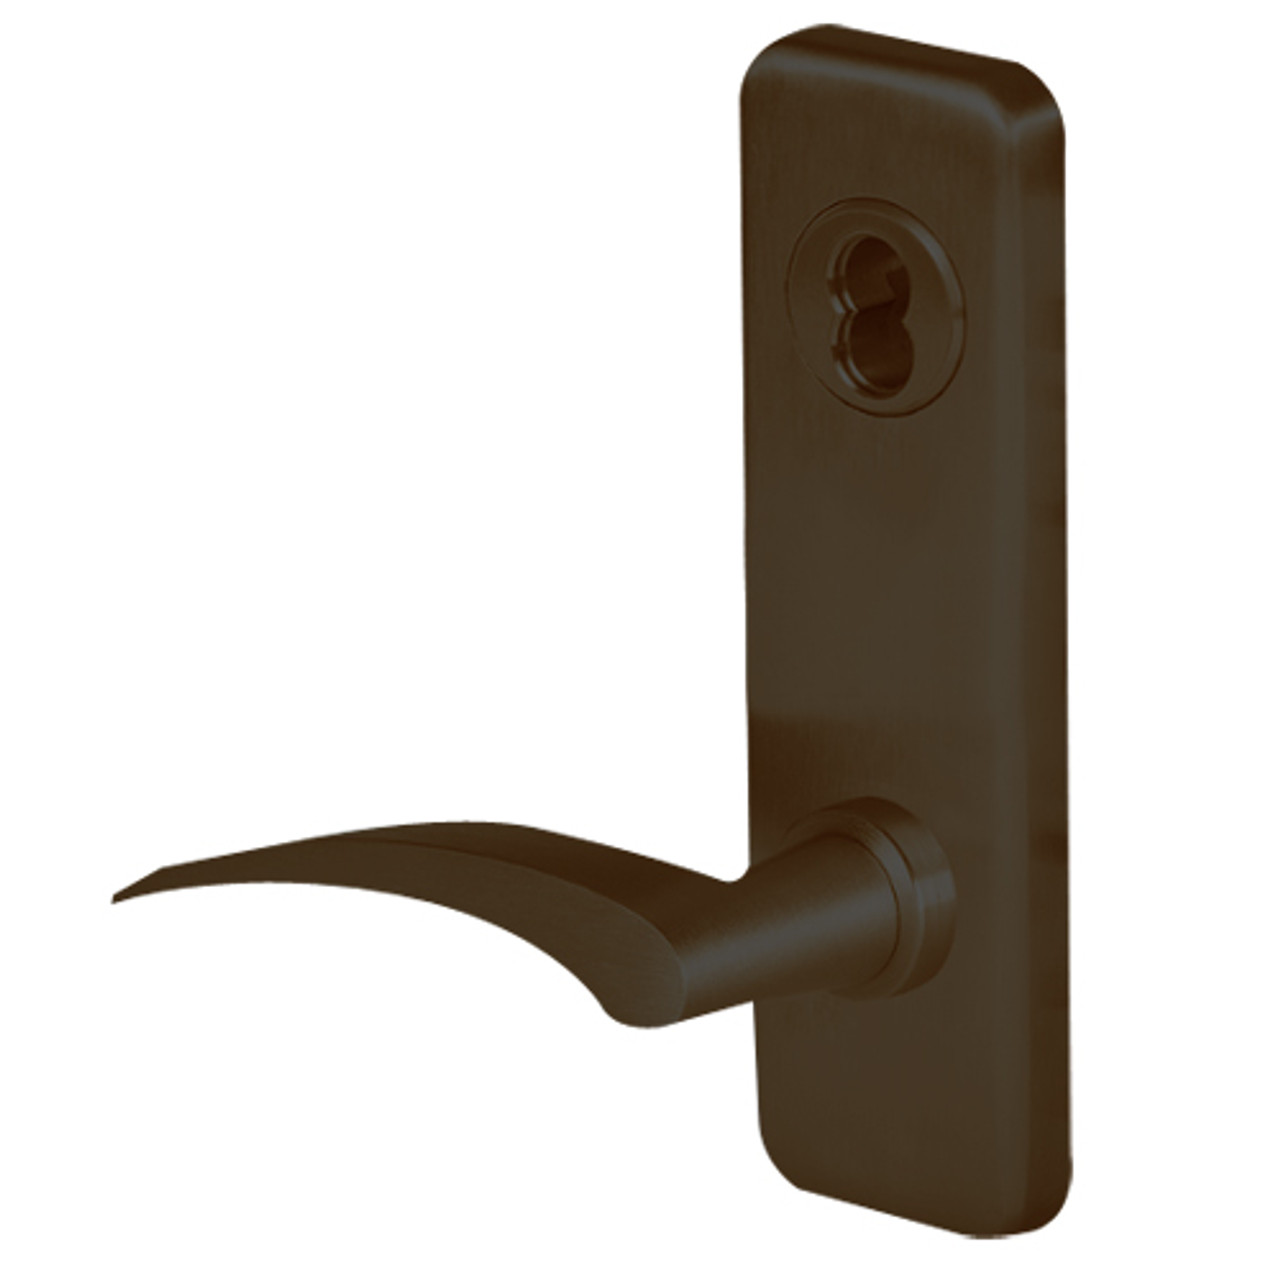 45H0LT17LJ613 Best 40H Series Privacy Heavy Duty Mortise Lever Lock with Gull Wing LH in Oil Rubbed Bronze